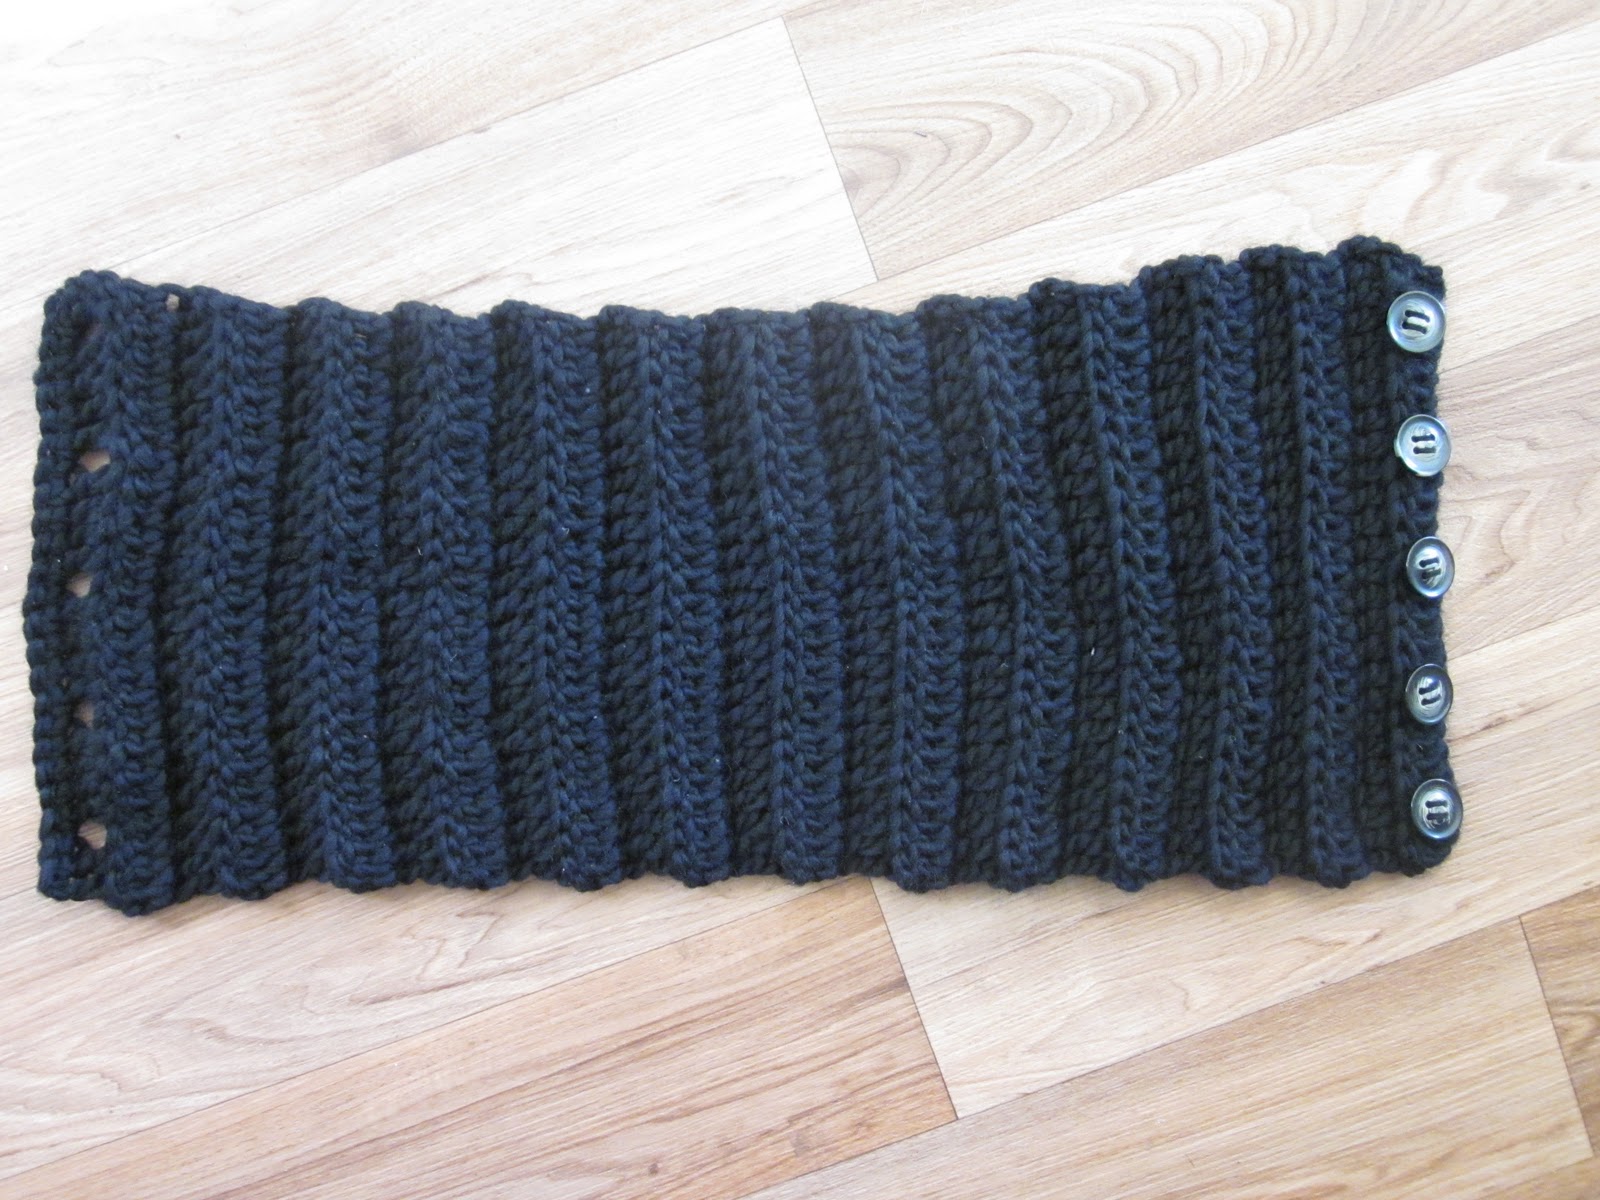 Not So Granny: Making Winter: Snuggling up and a FREE Cowl Pattern